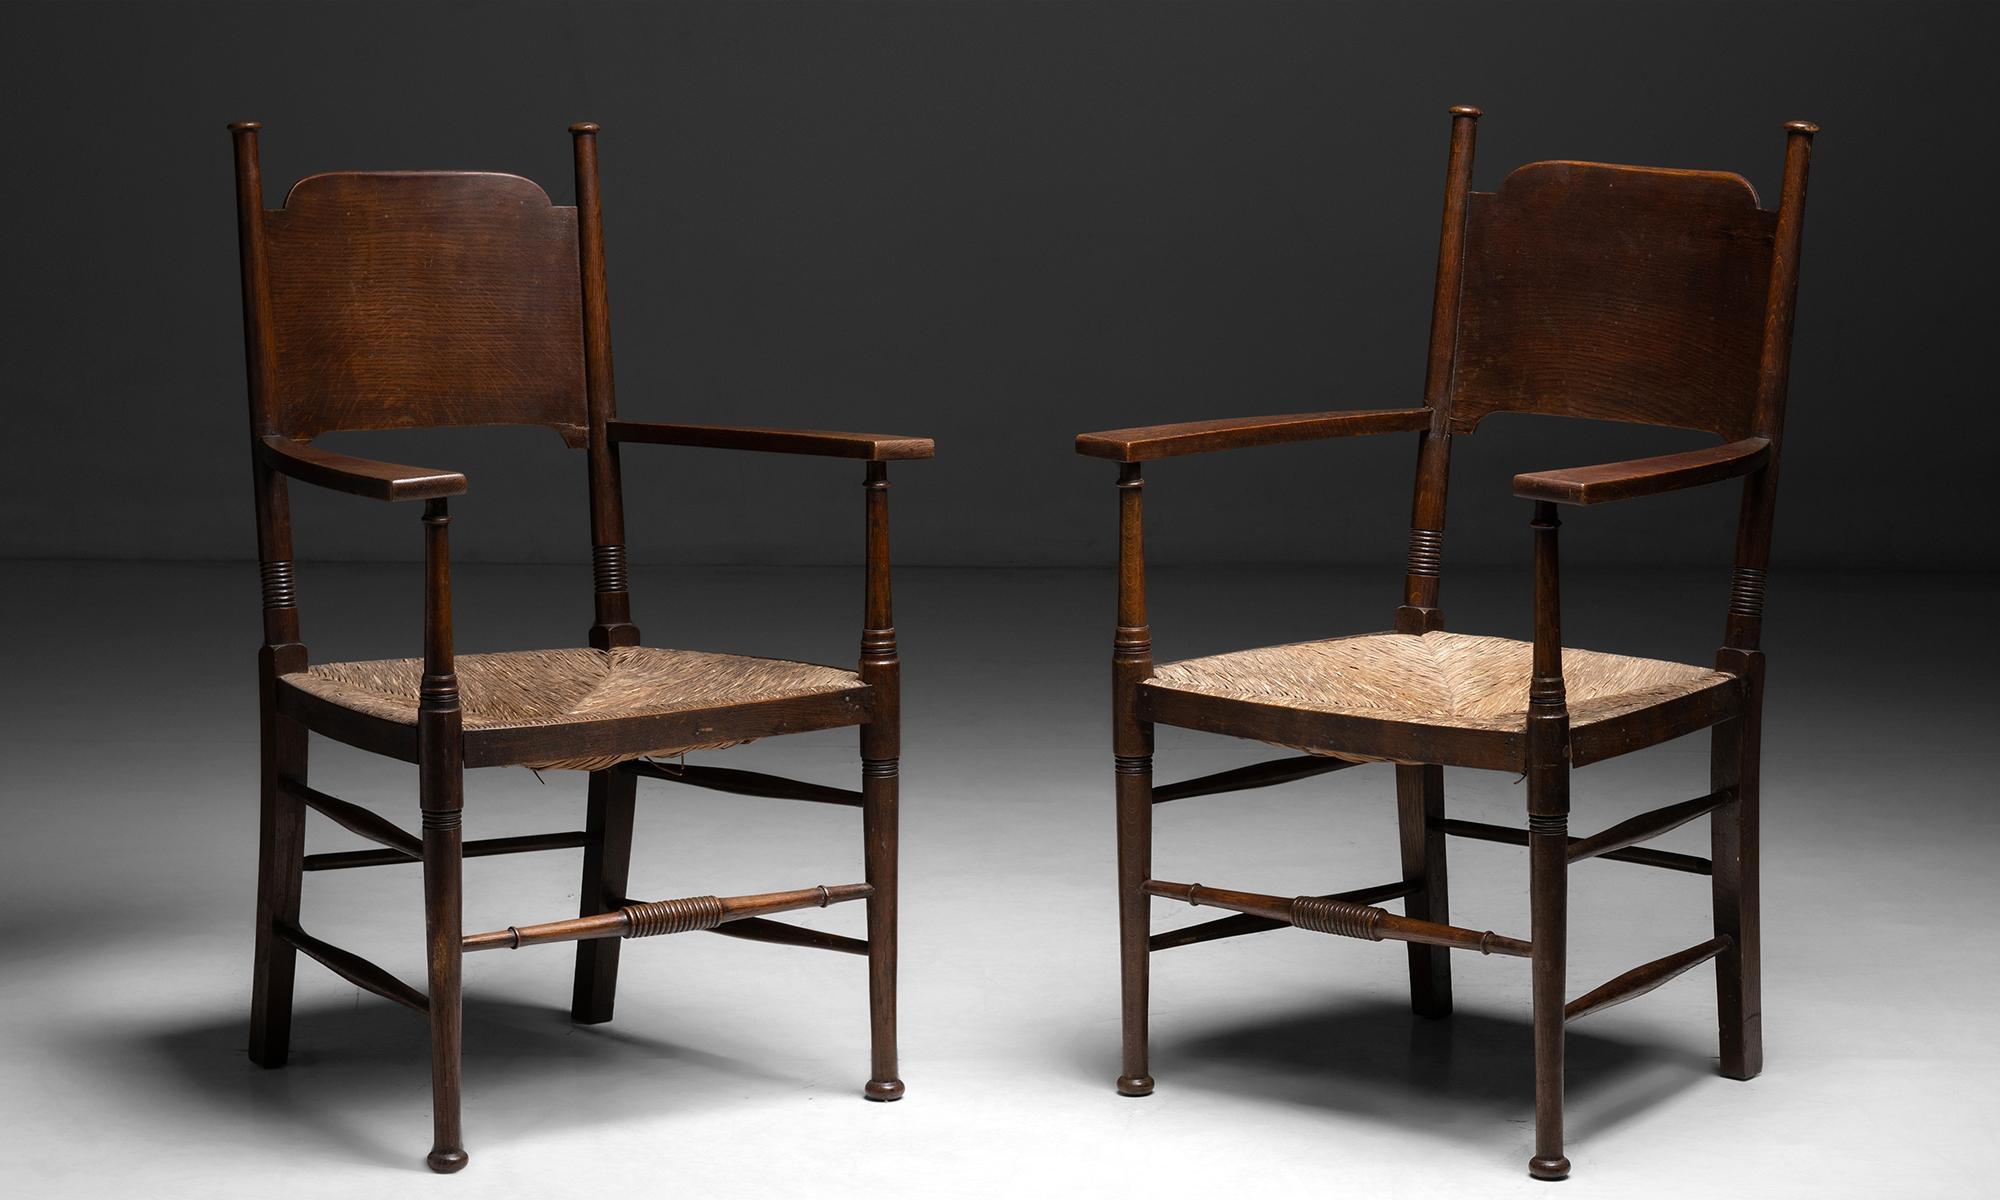 Oak & rush armchairs by William Birch

England circa 1890

Hand crafted oak frame with original rush seats.

Measures: 25.75” W x 19.5” D x 41” H x 18.25”seat.

